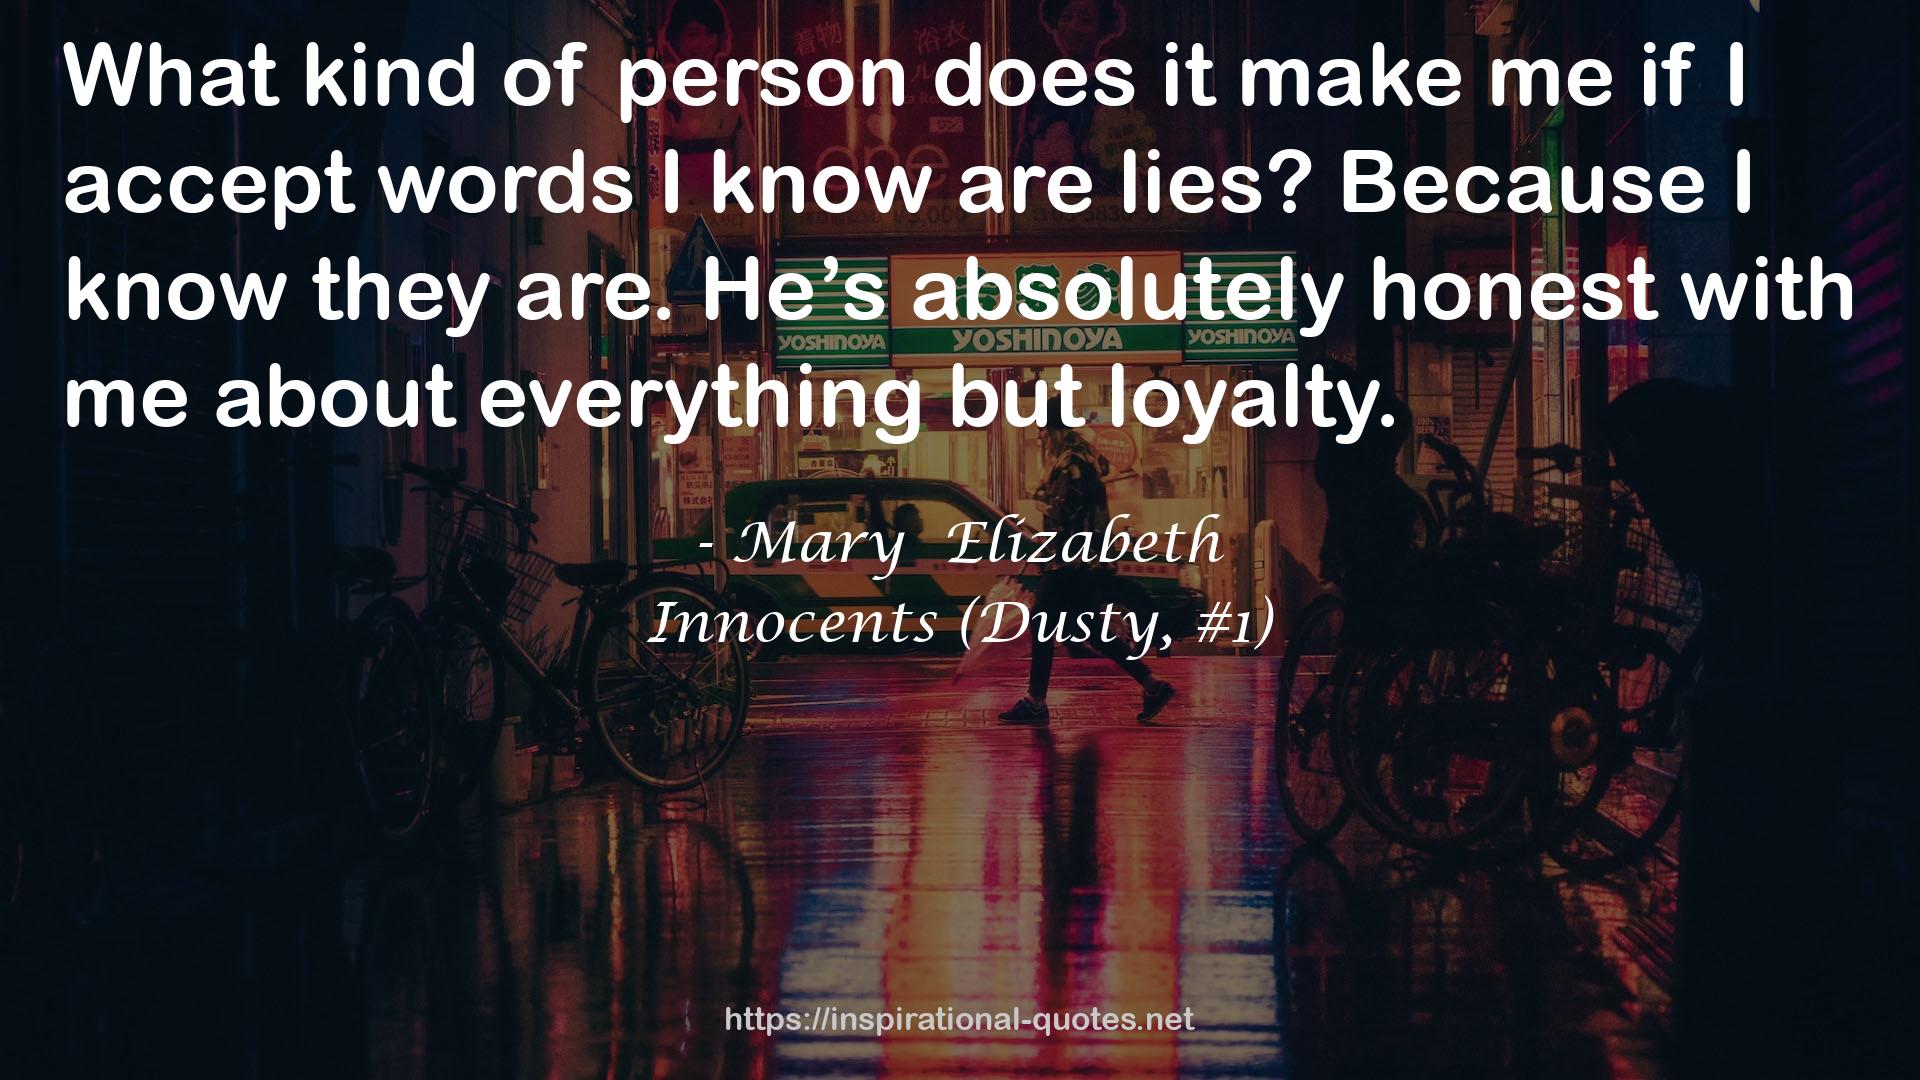 Innocents (Dusty, #1) QUOTES